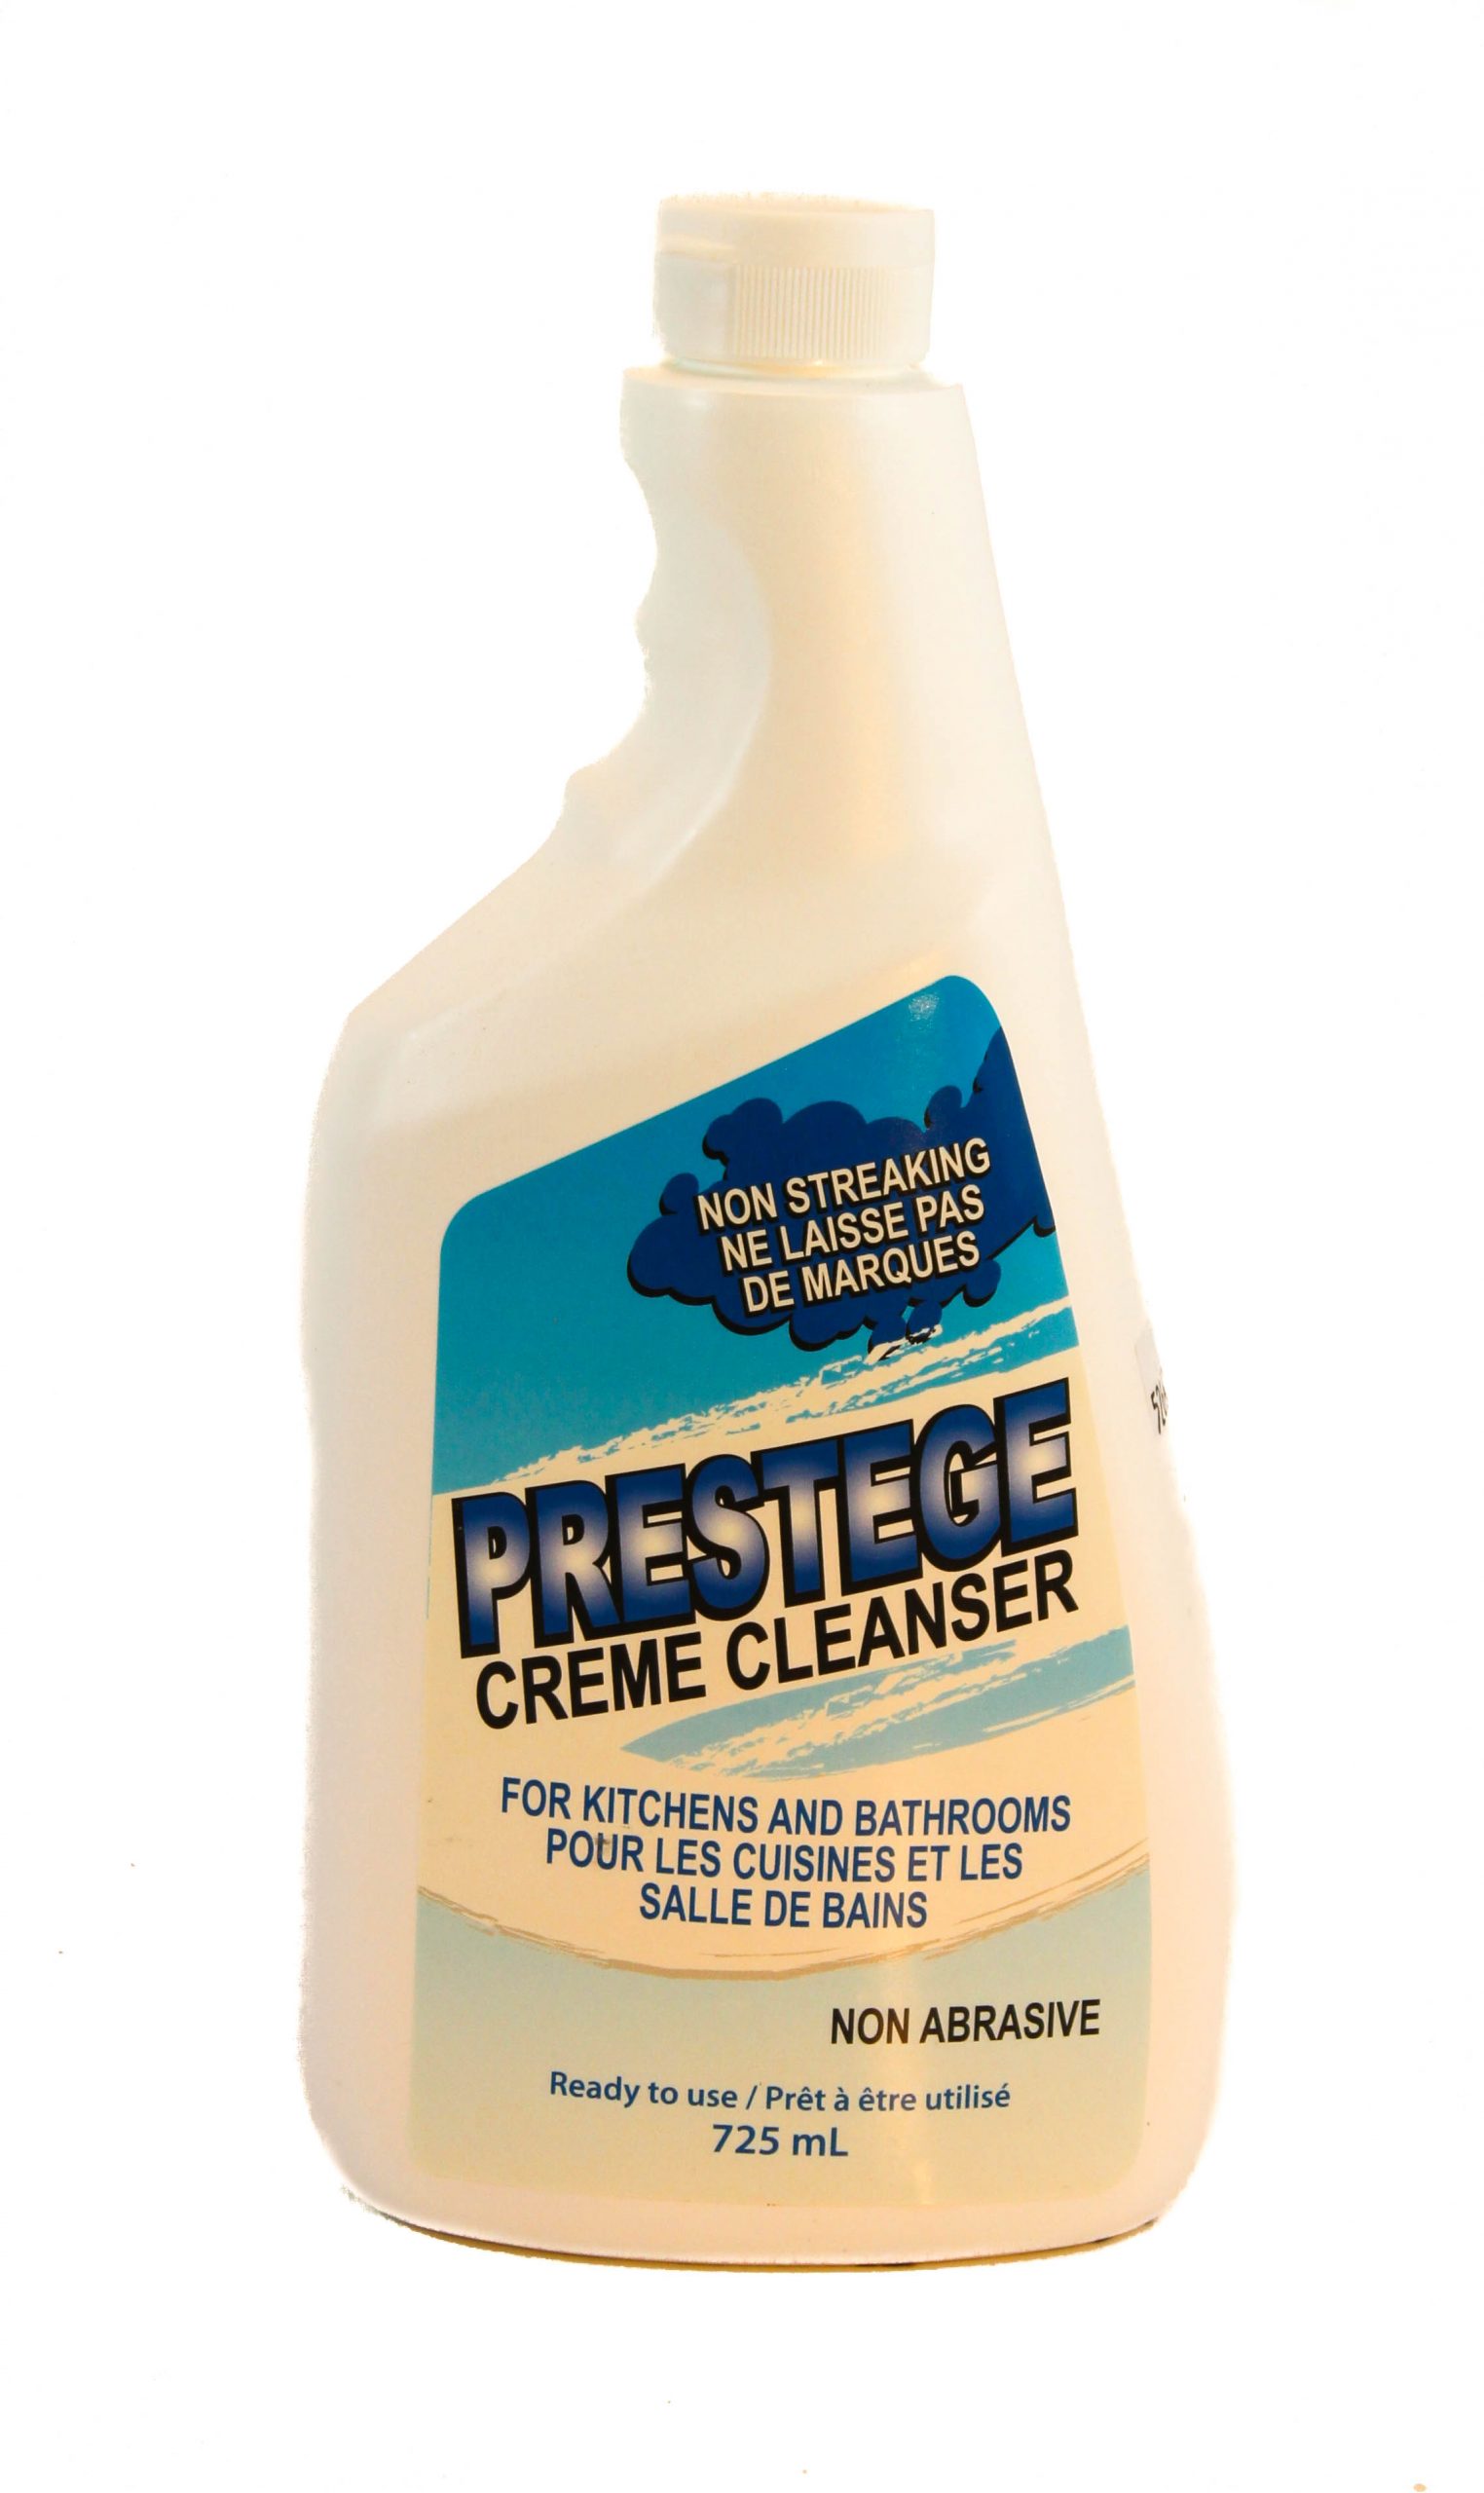 CP Industries Prestege Creme Cleanser for kitchens and bathrooms